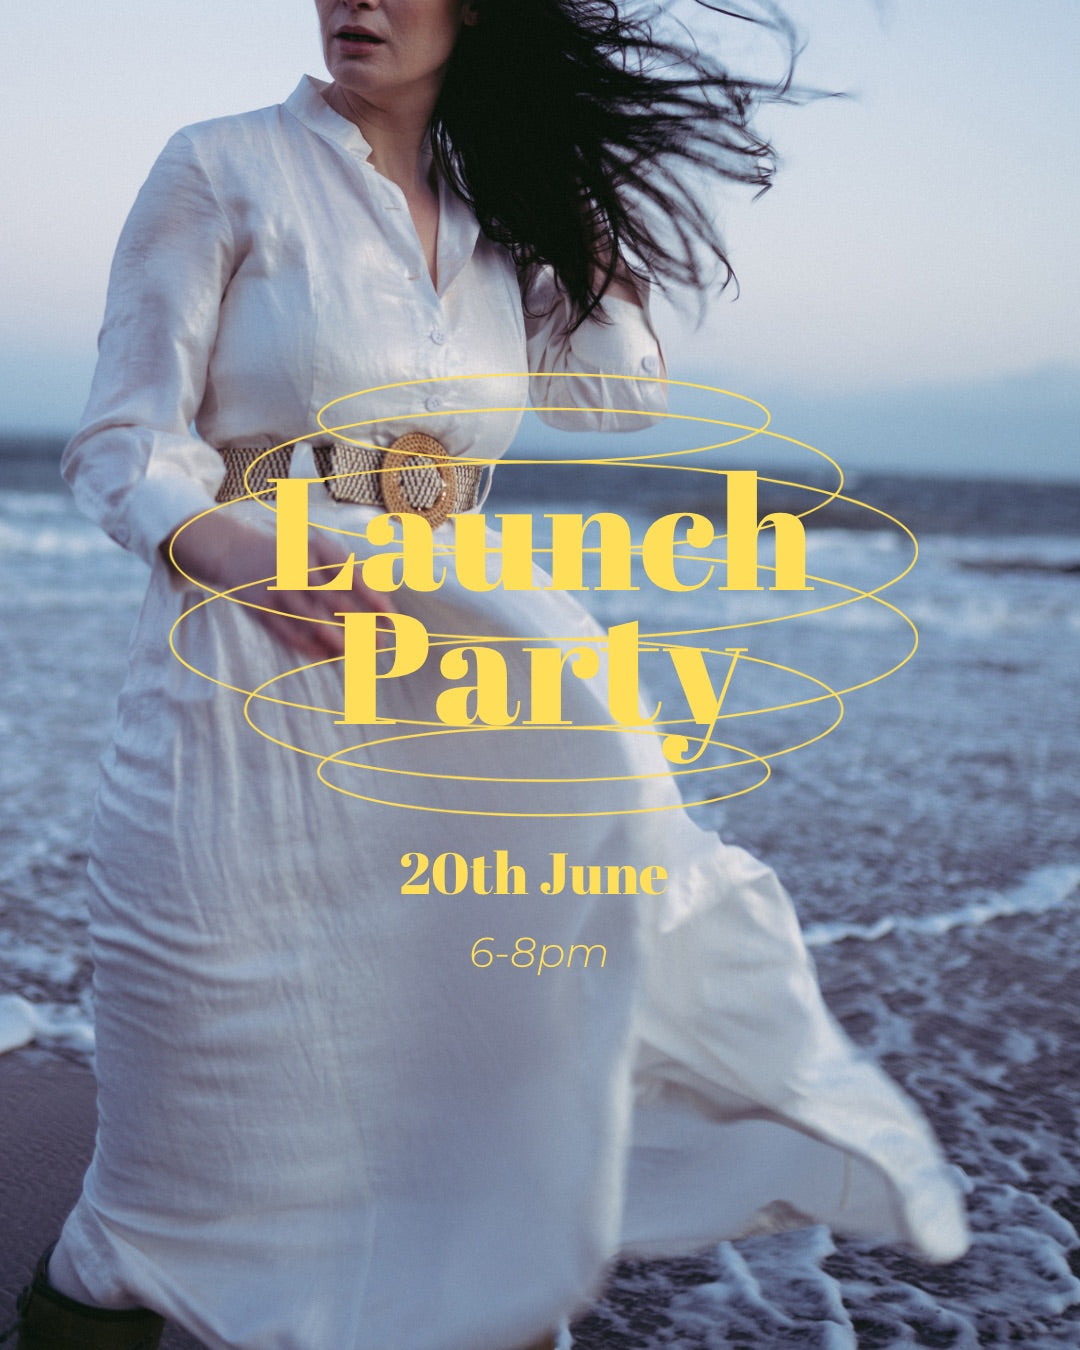 OPENING PARTY - 20th June